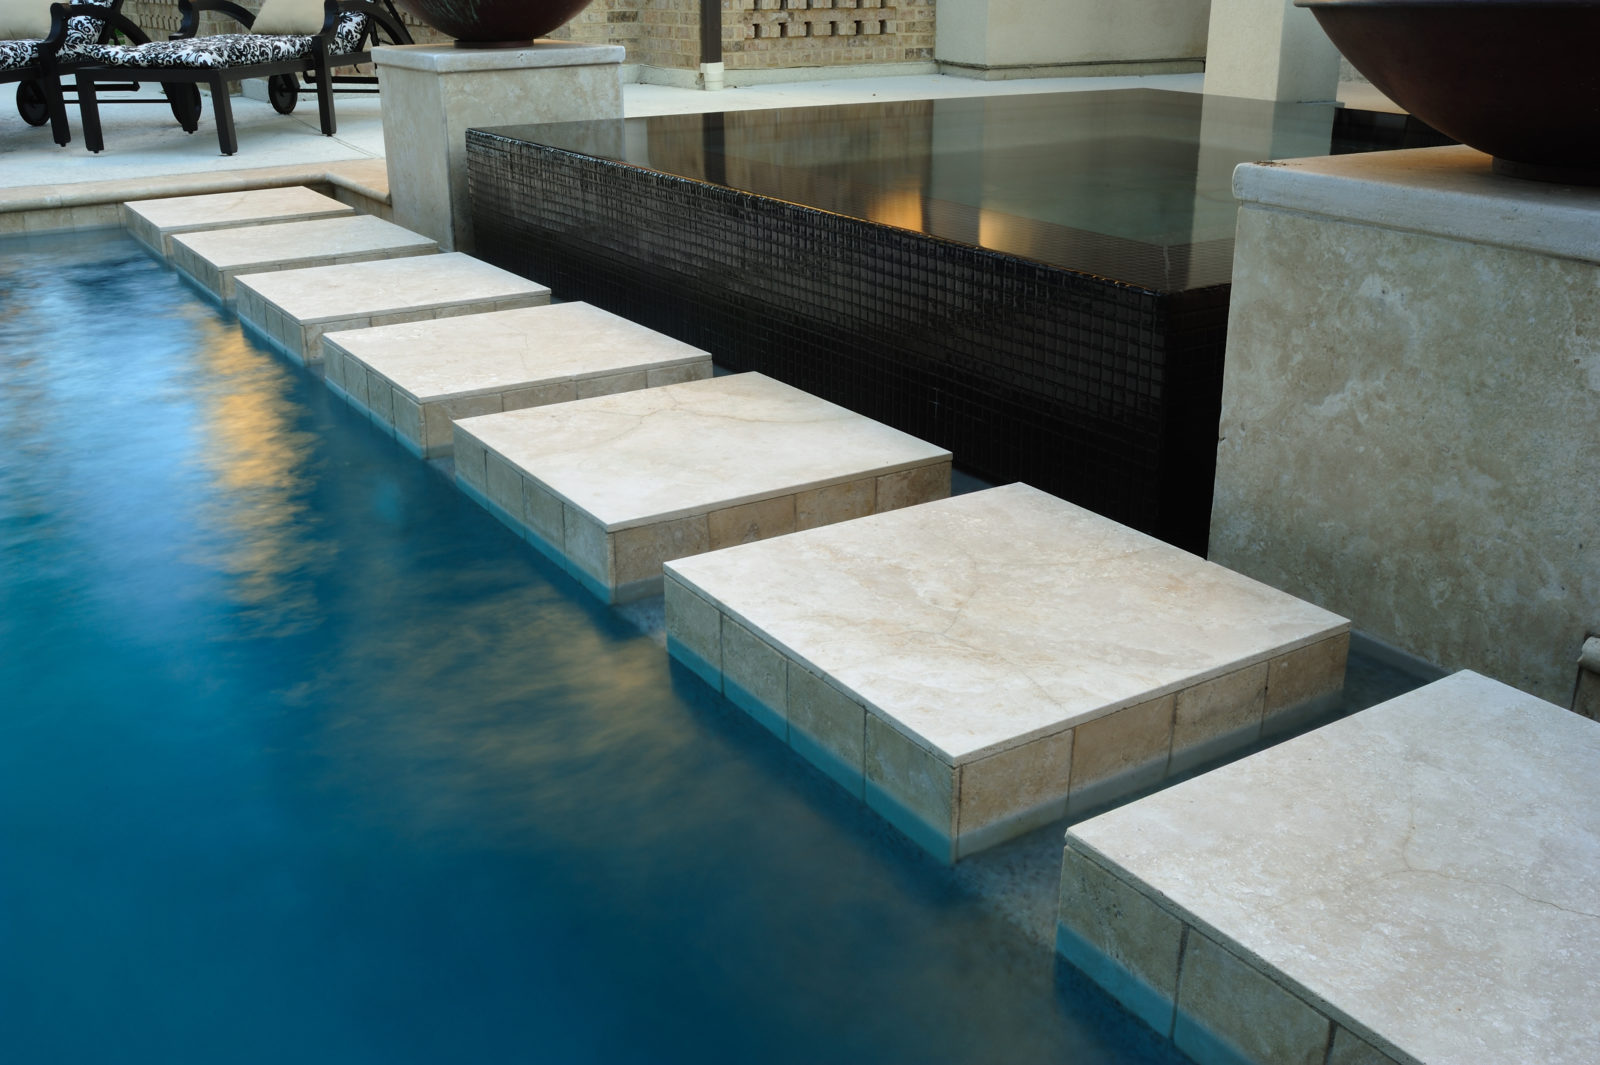 Waterline Tile How To Select The Best, Can You Use Porcelain Tile In A Pool